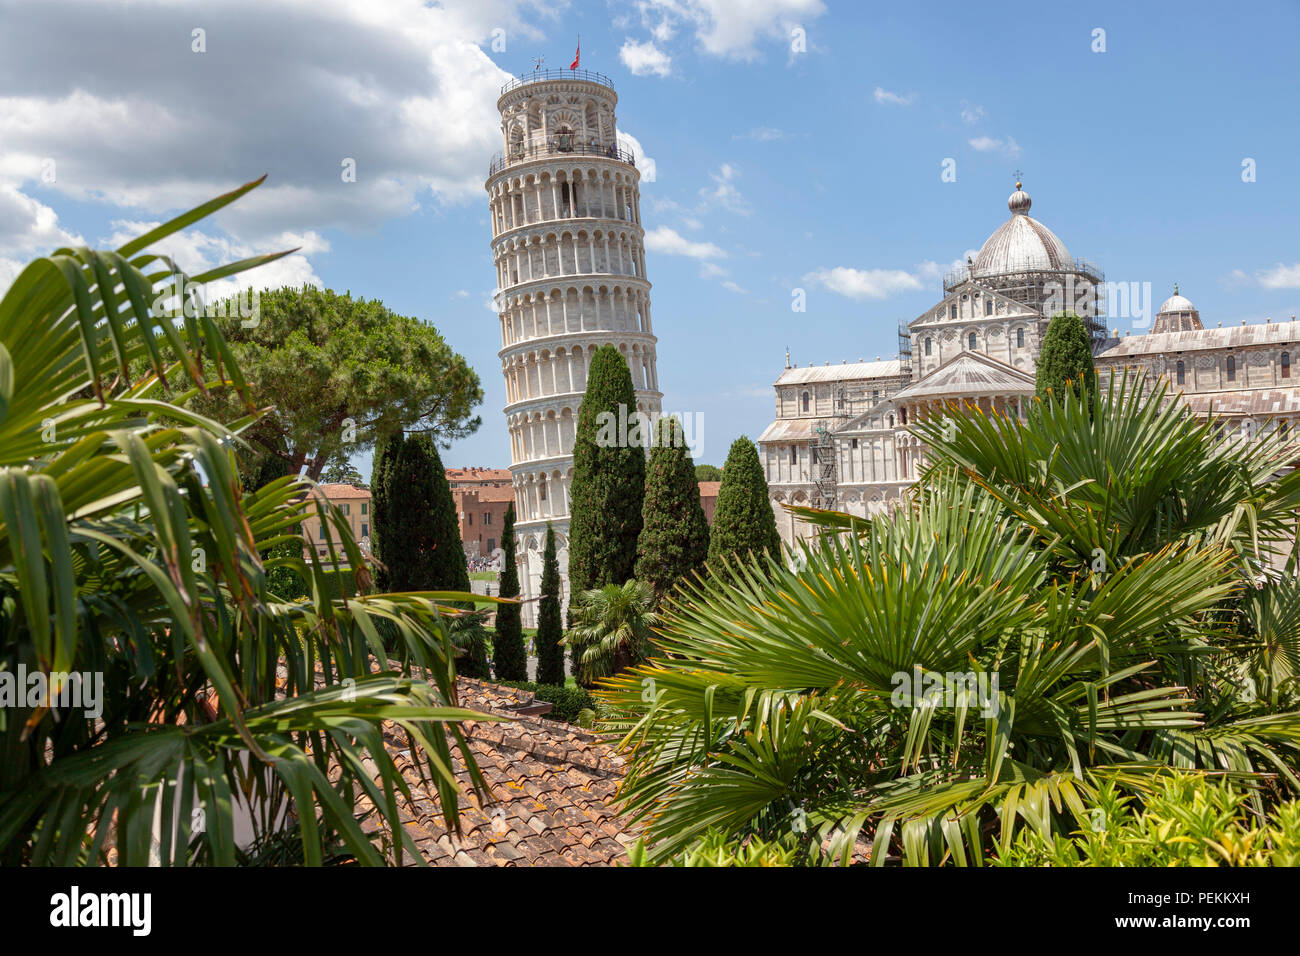 The Northern sides of the Leaning Tower and the cathedral of Pisa (Tuscany) seen from an unusual visual angle. Le côté Nord de la Tour penchée de Pise Stock Photo